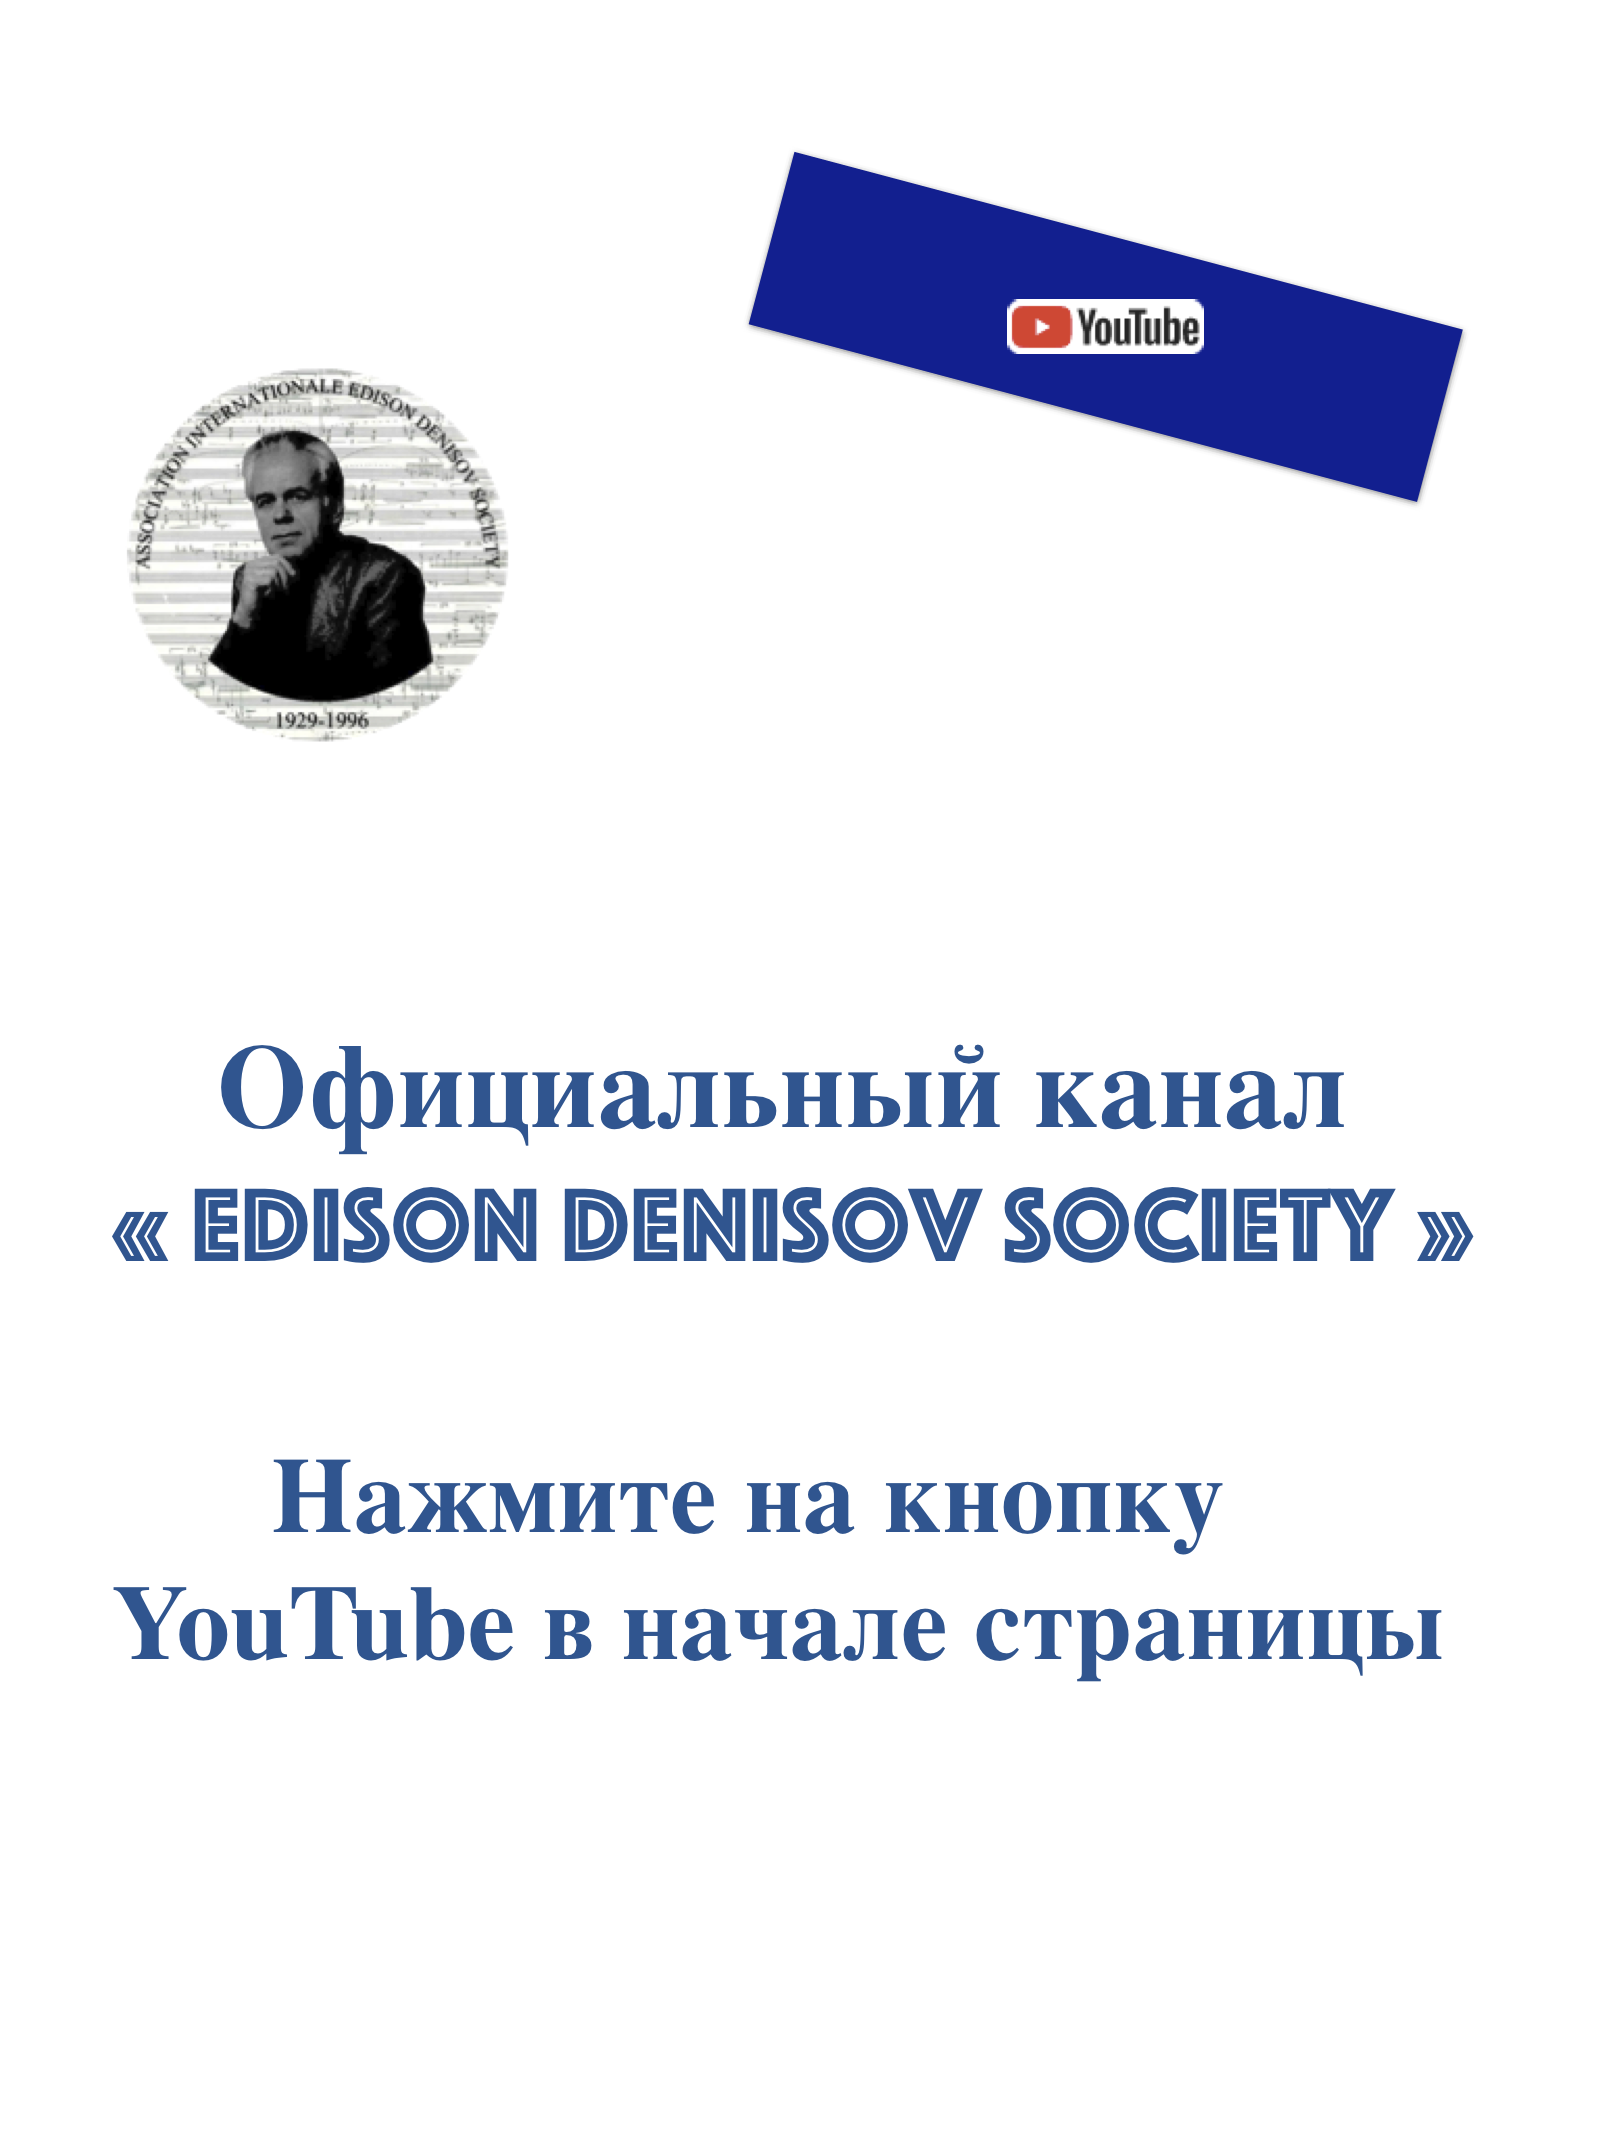 YouTube russe.png